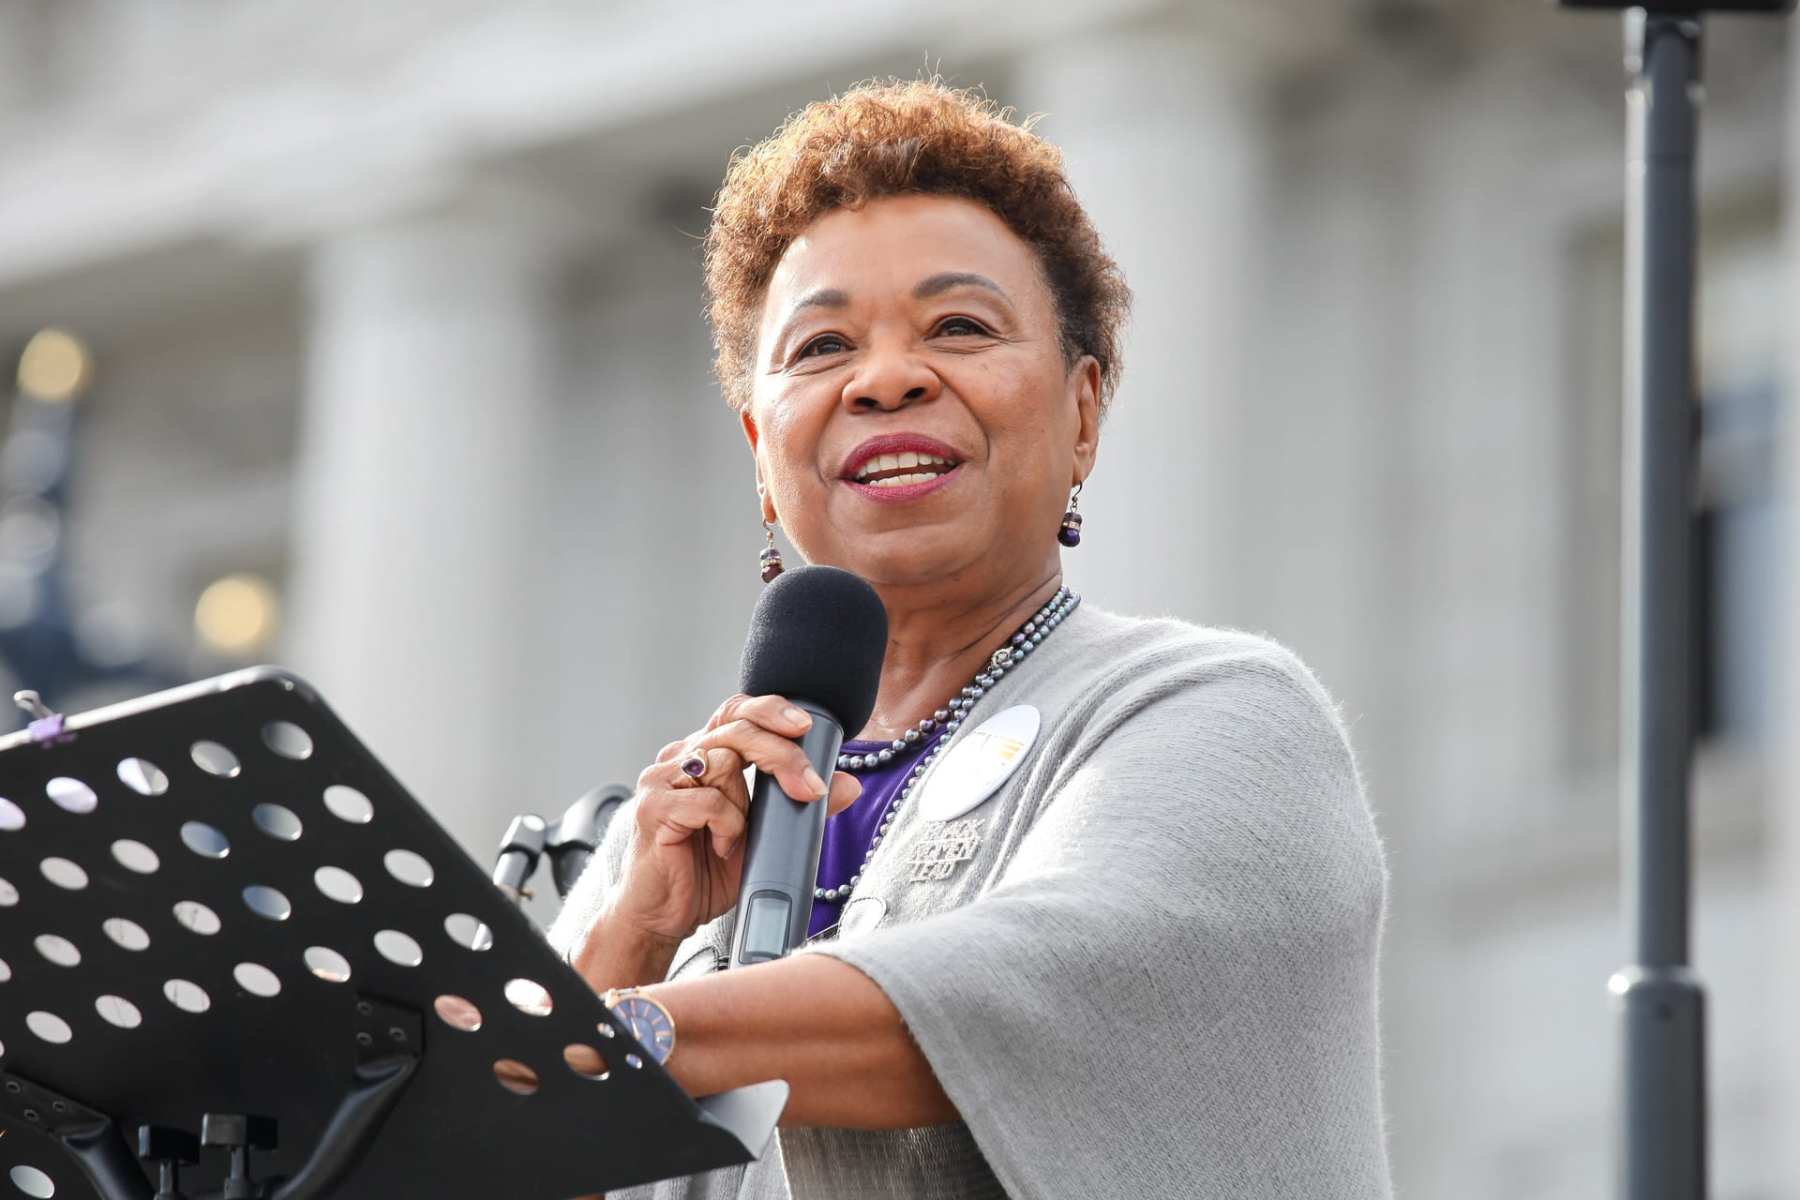 U.S. Rep Barbara Lee speaks onstage at Civic Center Plaza during the Women's March San Francisco on January 19, 2019 in San Francisco, California.